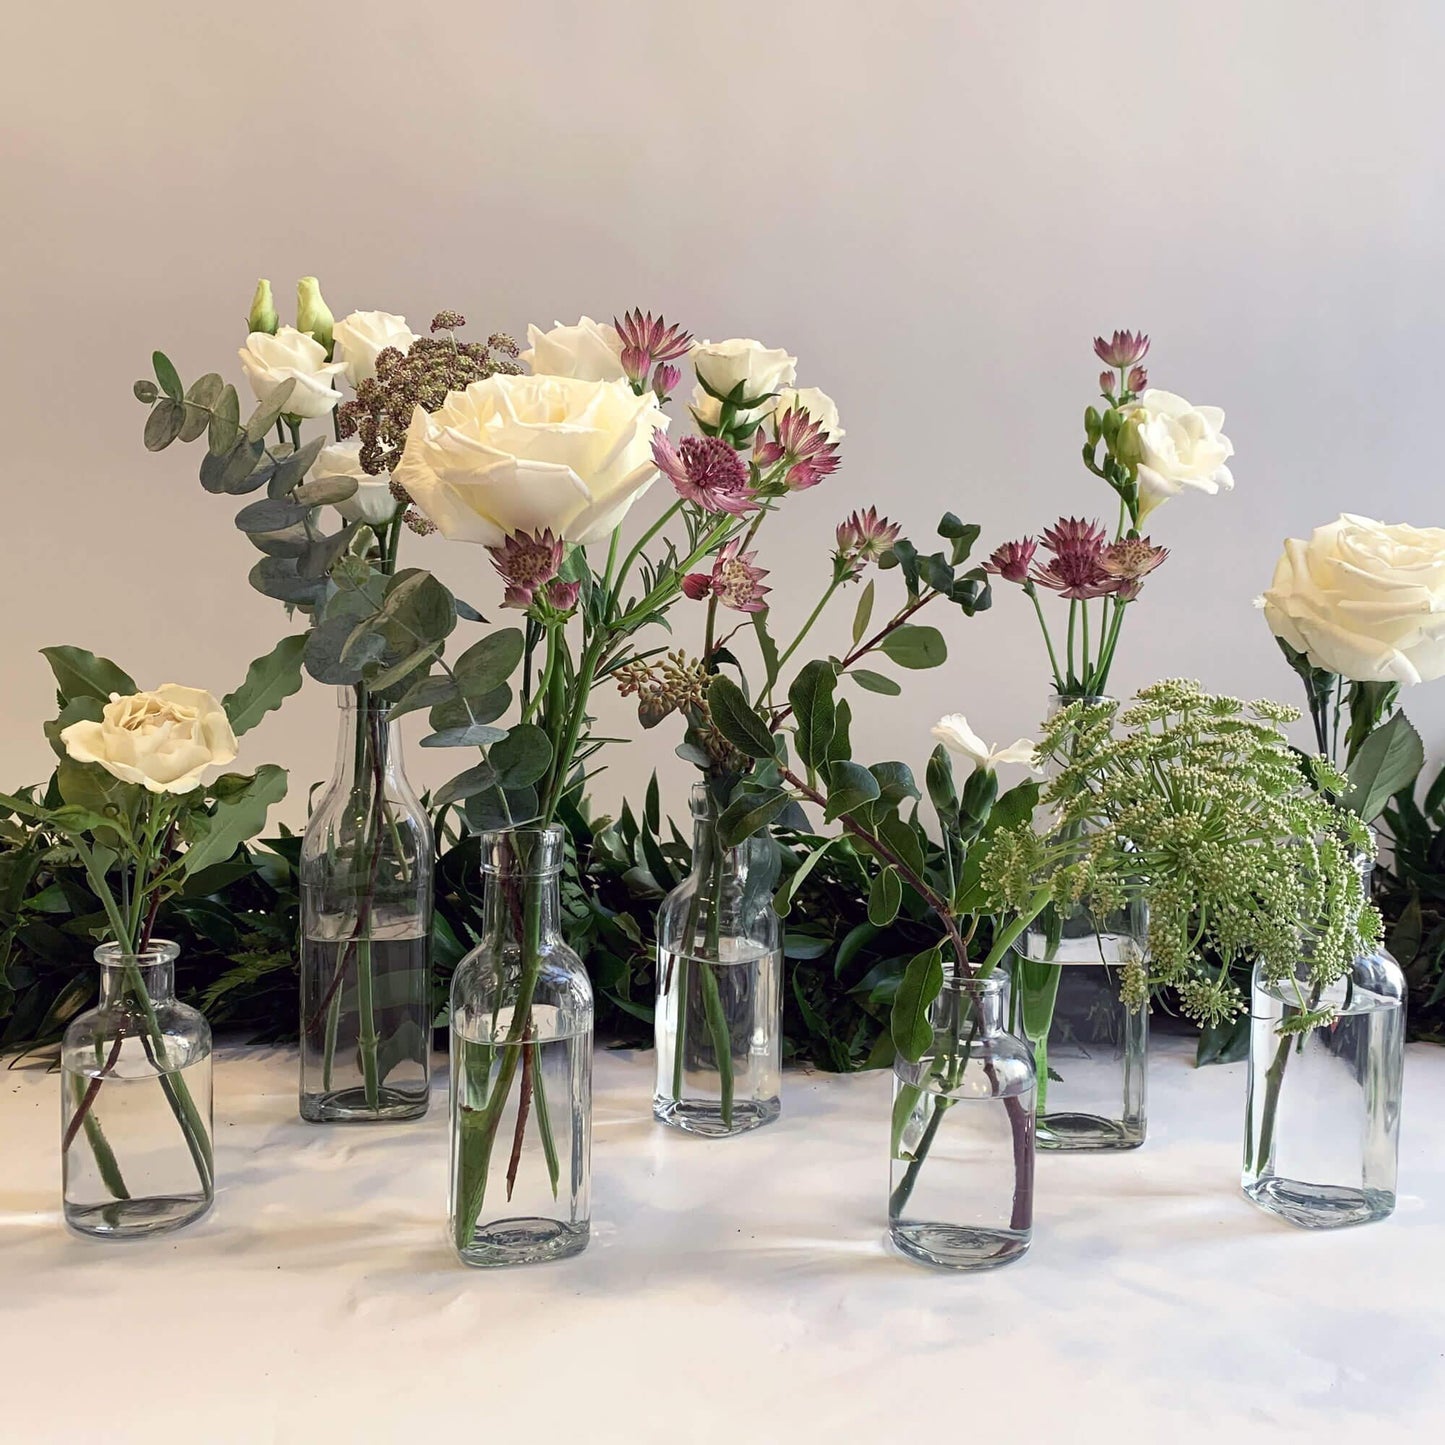 Load image into Gallery viewer, A serene arrangement of white roses, assorted flowers, and greenery in glass vases, accentuated by the soft glow of candles in crystal holders against a light backdrop. Order online for same-day flower delivery from the best wedding florist in Toronto near you.
